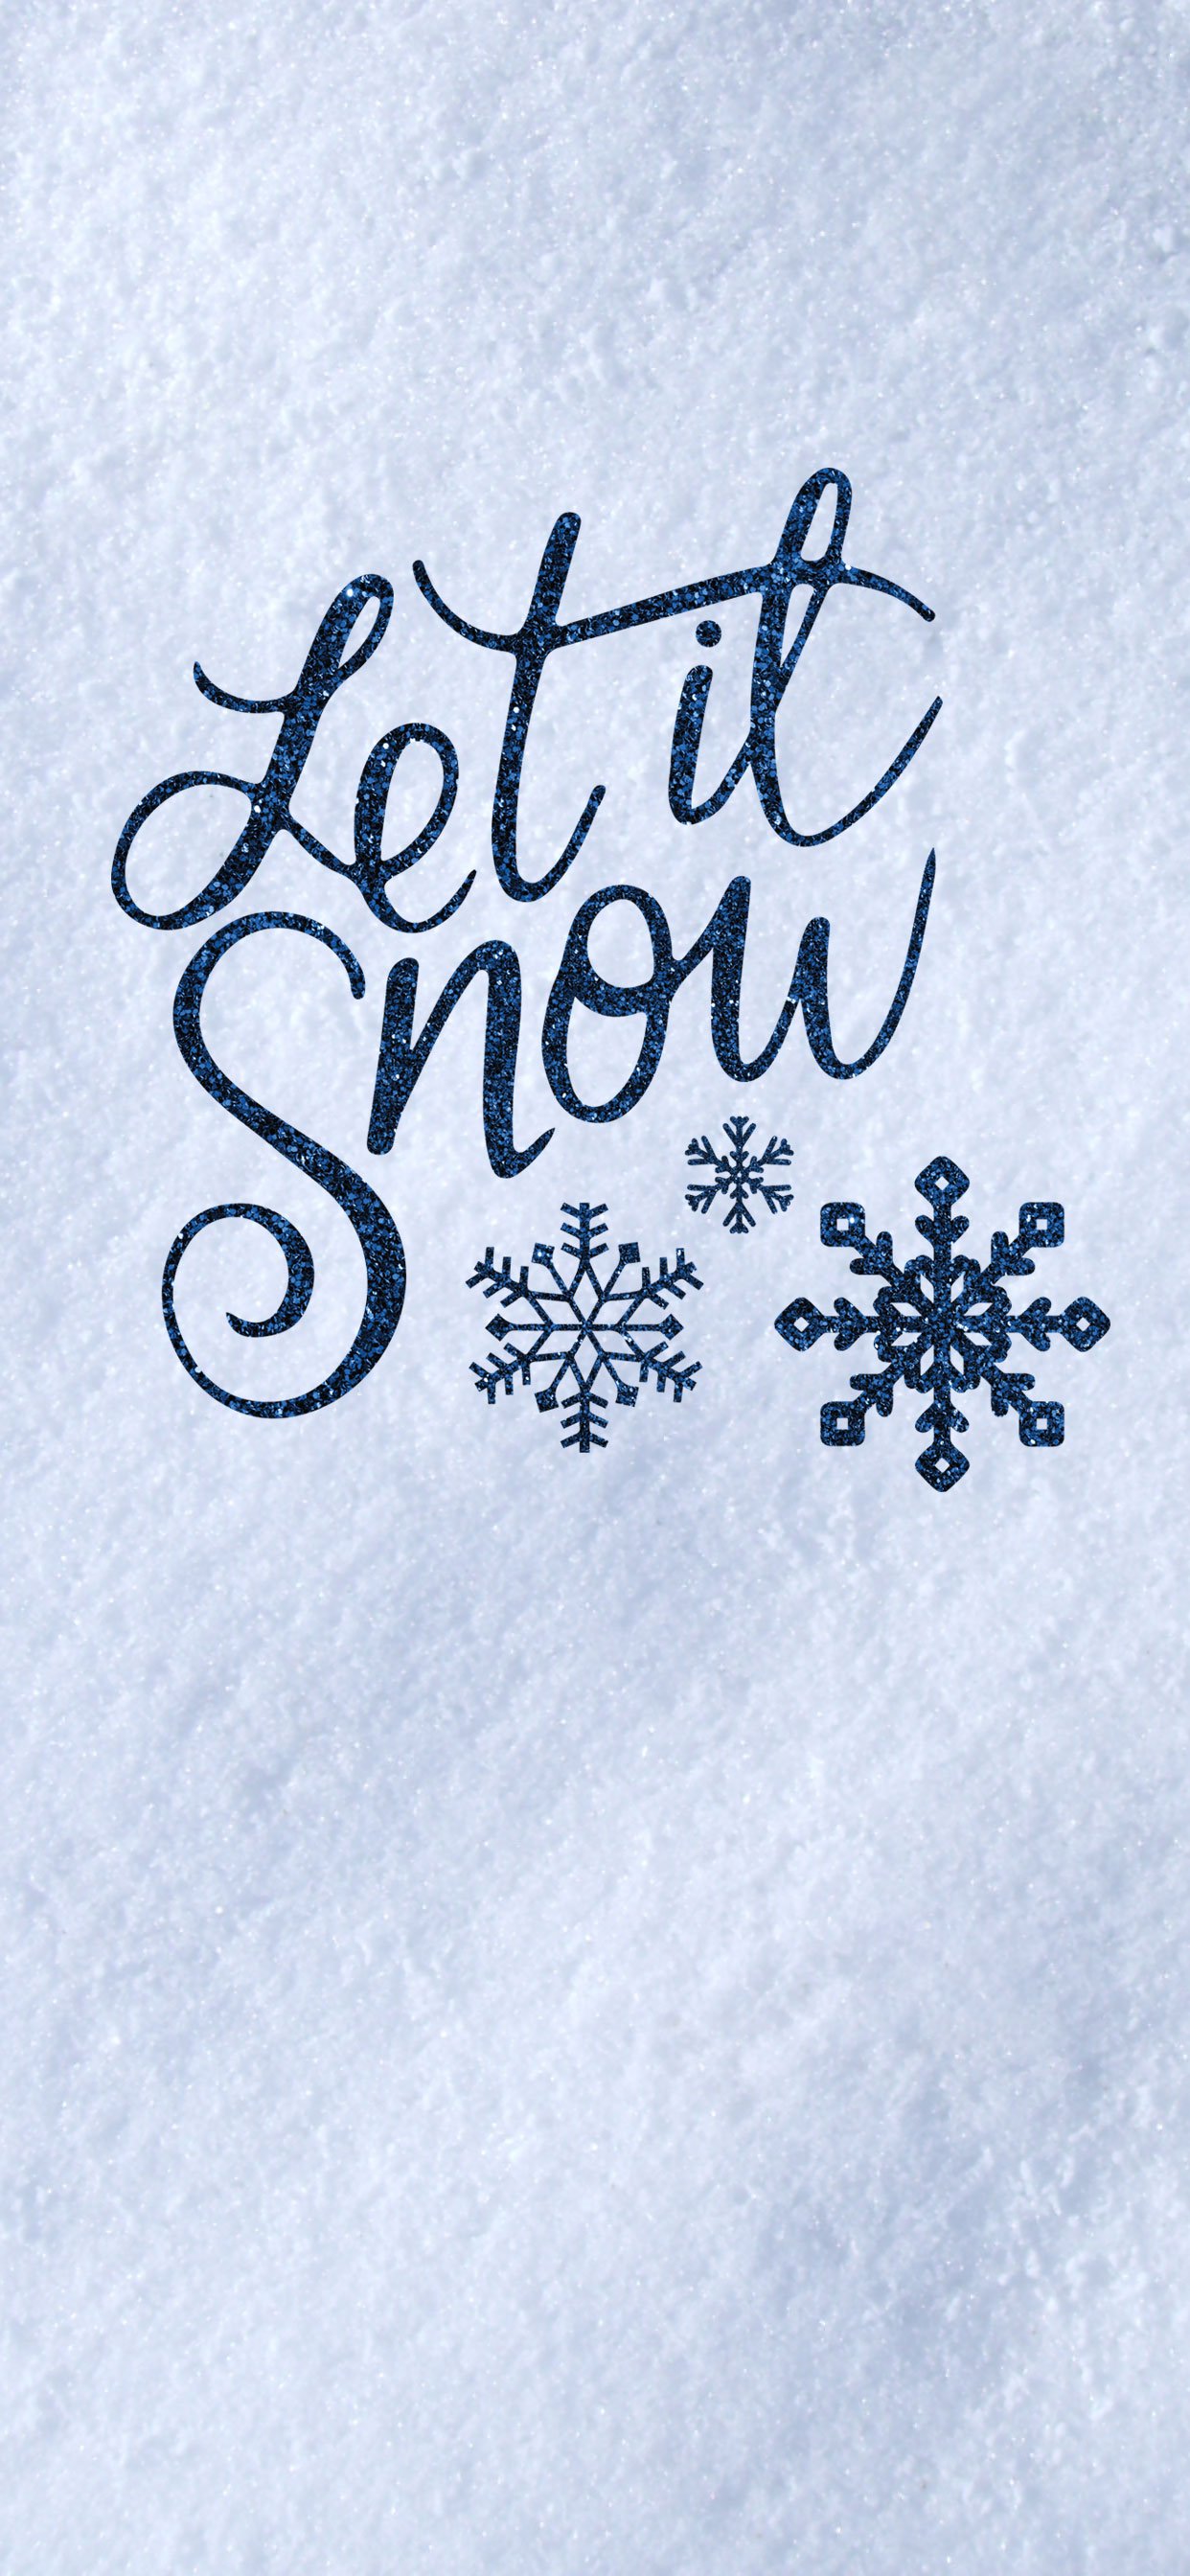 Let-It-Snow-Christmas-Typography-iPhone-Xs-Max-Wallpaper-1.jpg